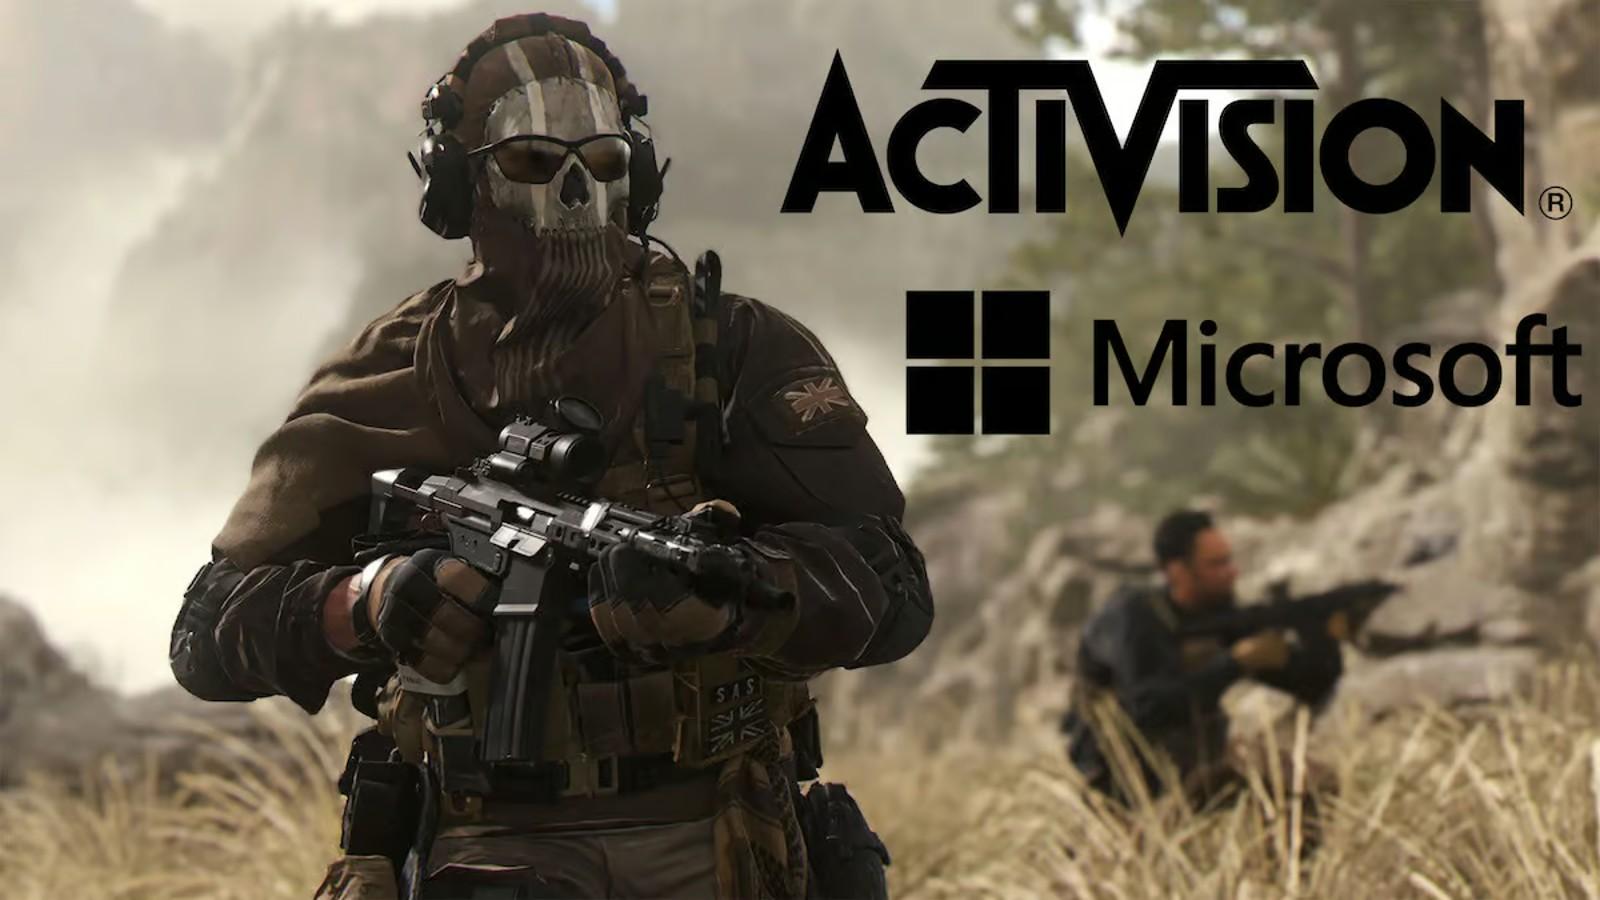 Microsoft Adds Ubisoft to Activision Deal - Spiceworks